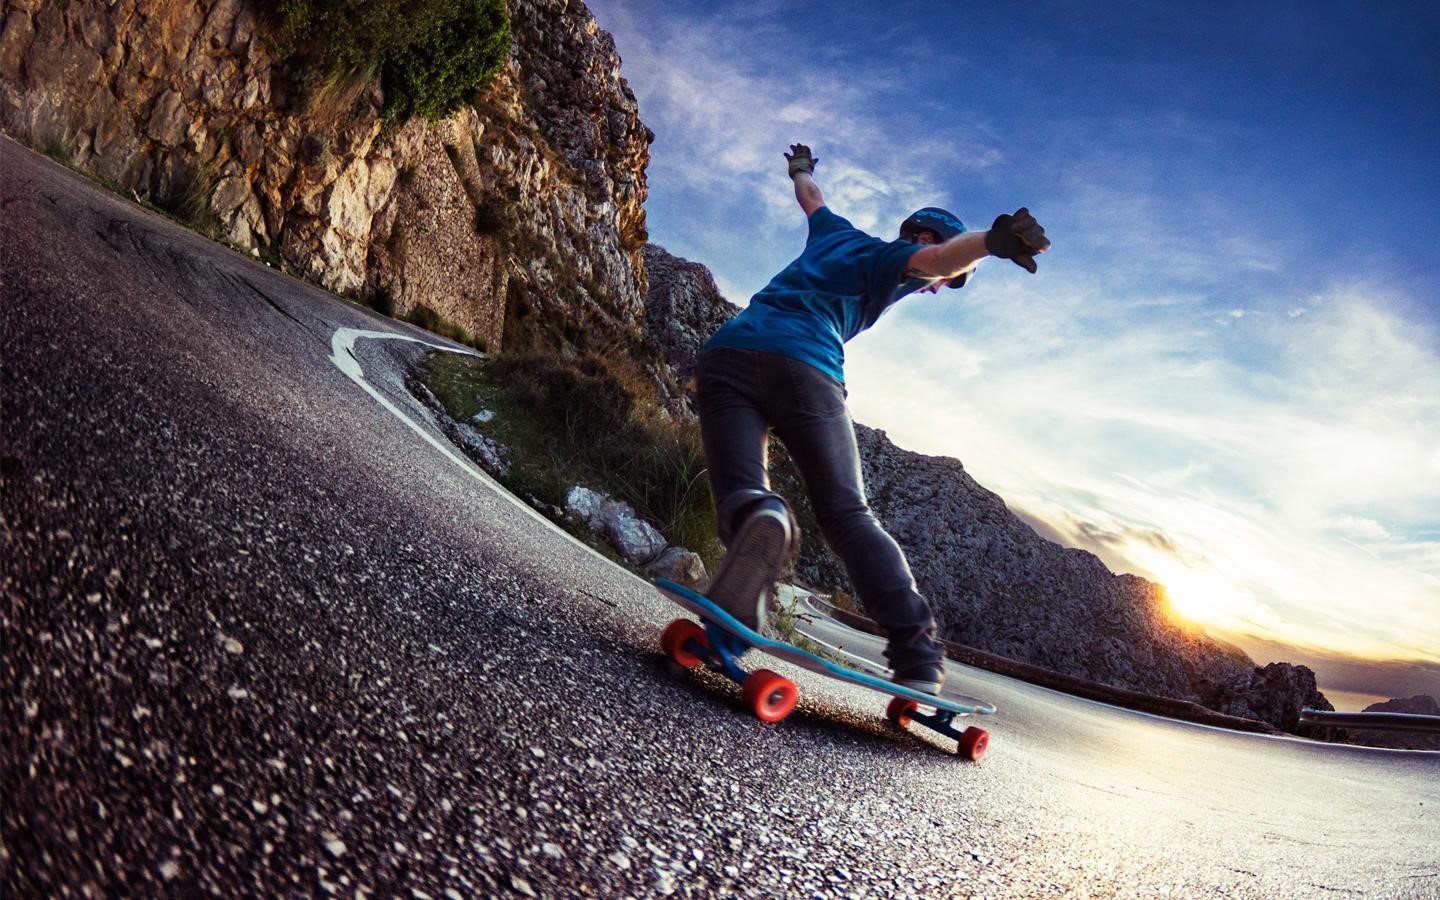 What You Need To Know To Have The Best Longboard Setup